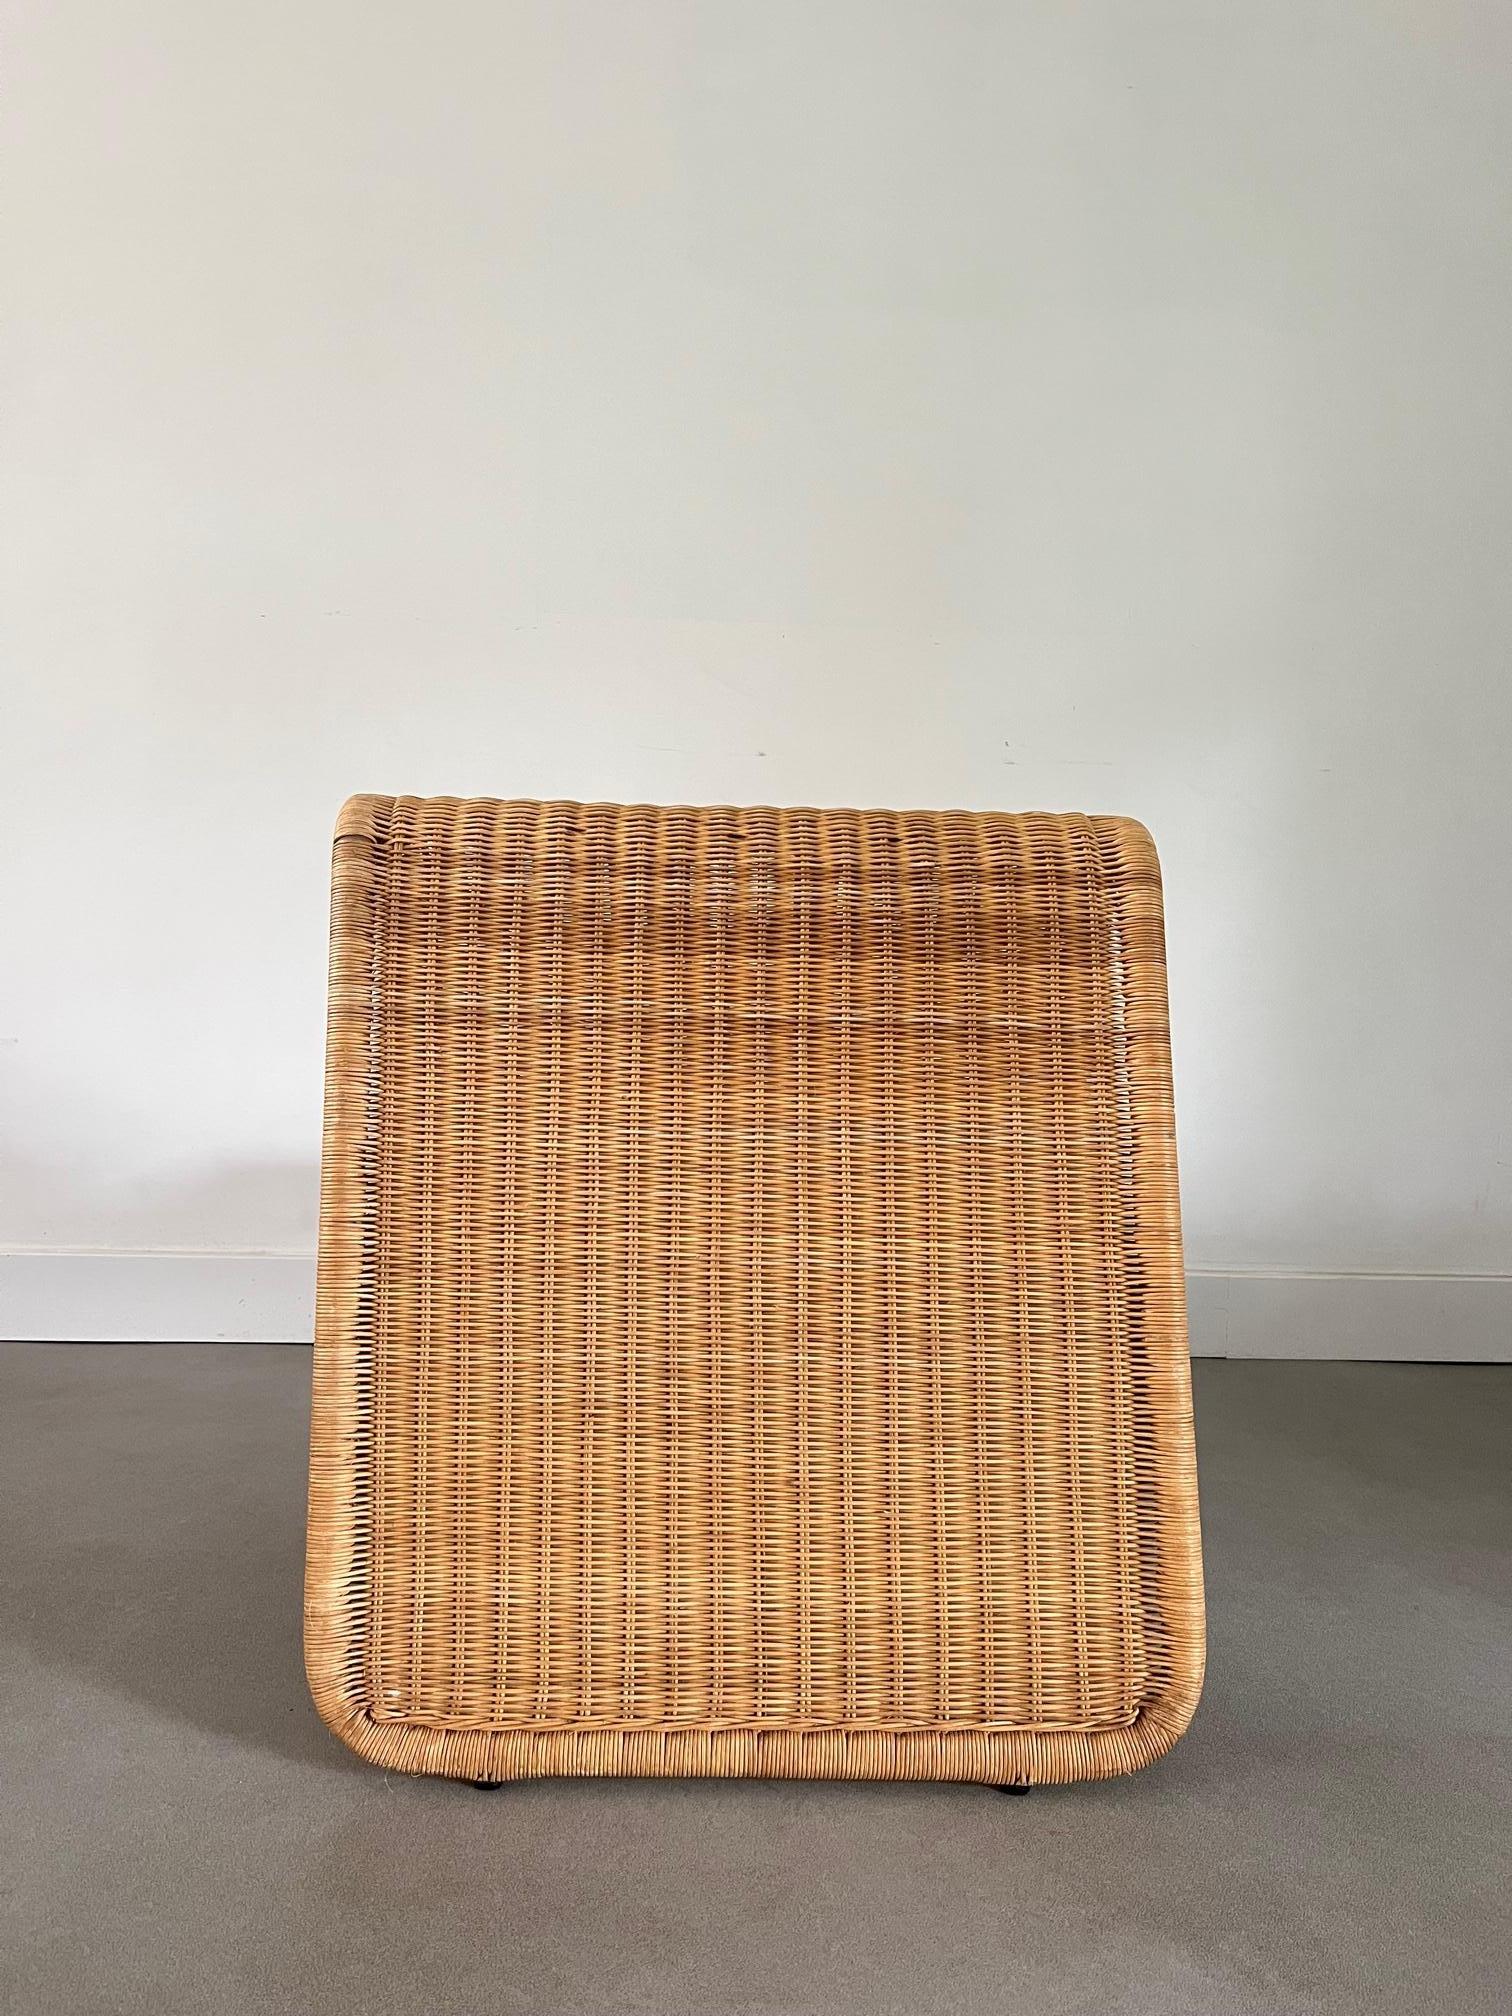 Post-Modern Hestra P8 Wicker/Rattan Lounge Chair in the Style of Tito Agnoli